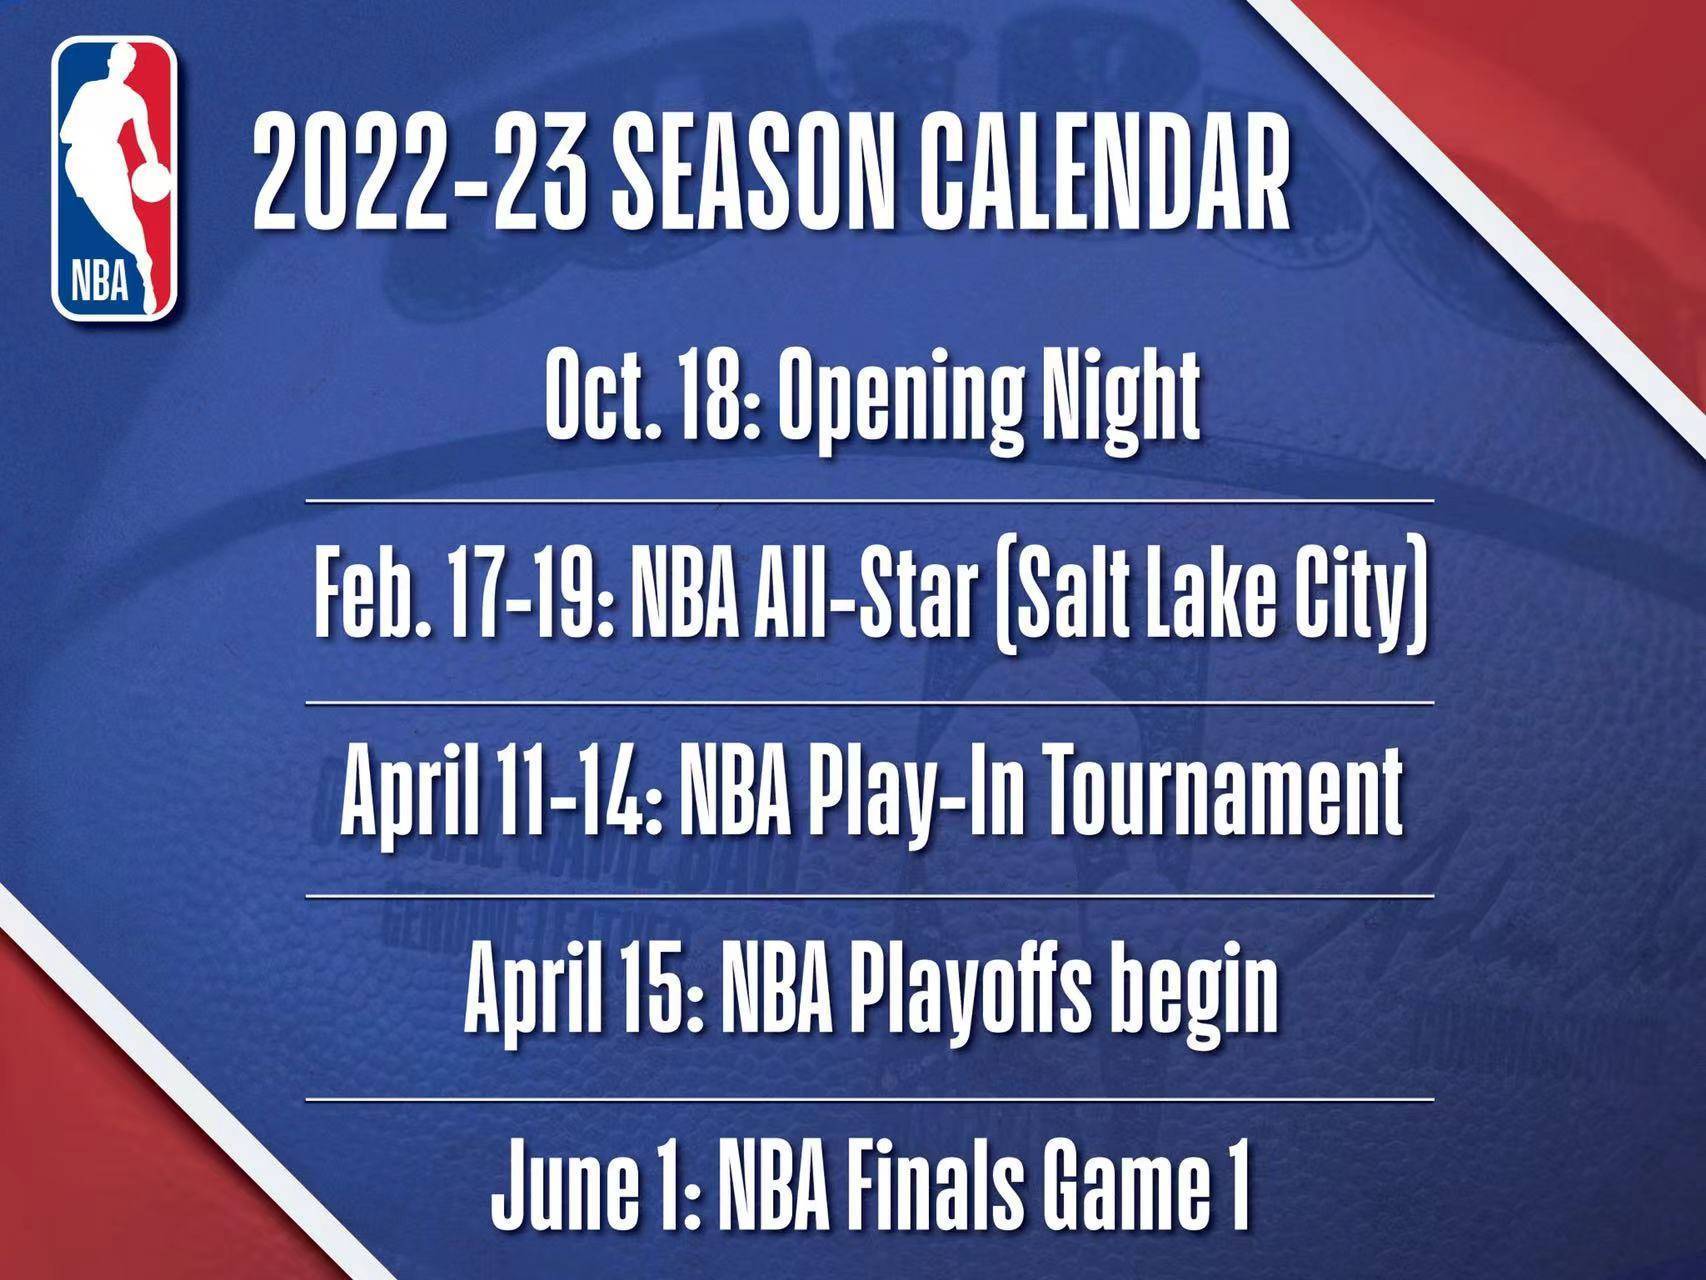 NBA introduces Rivals Week in the 2022-23 season